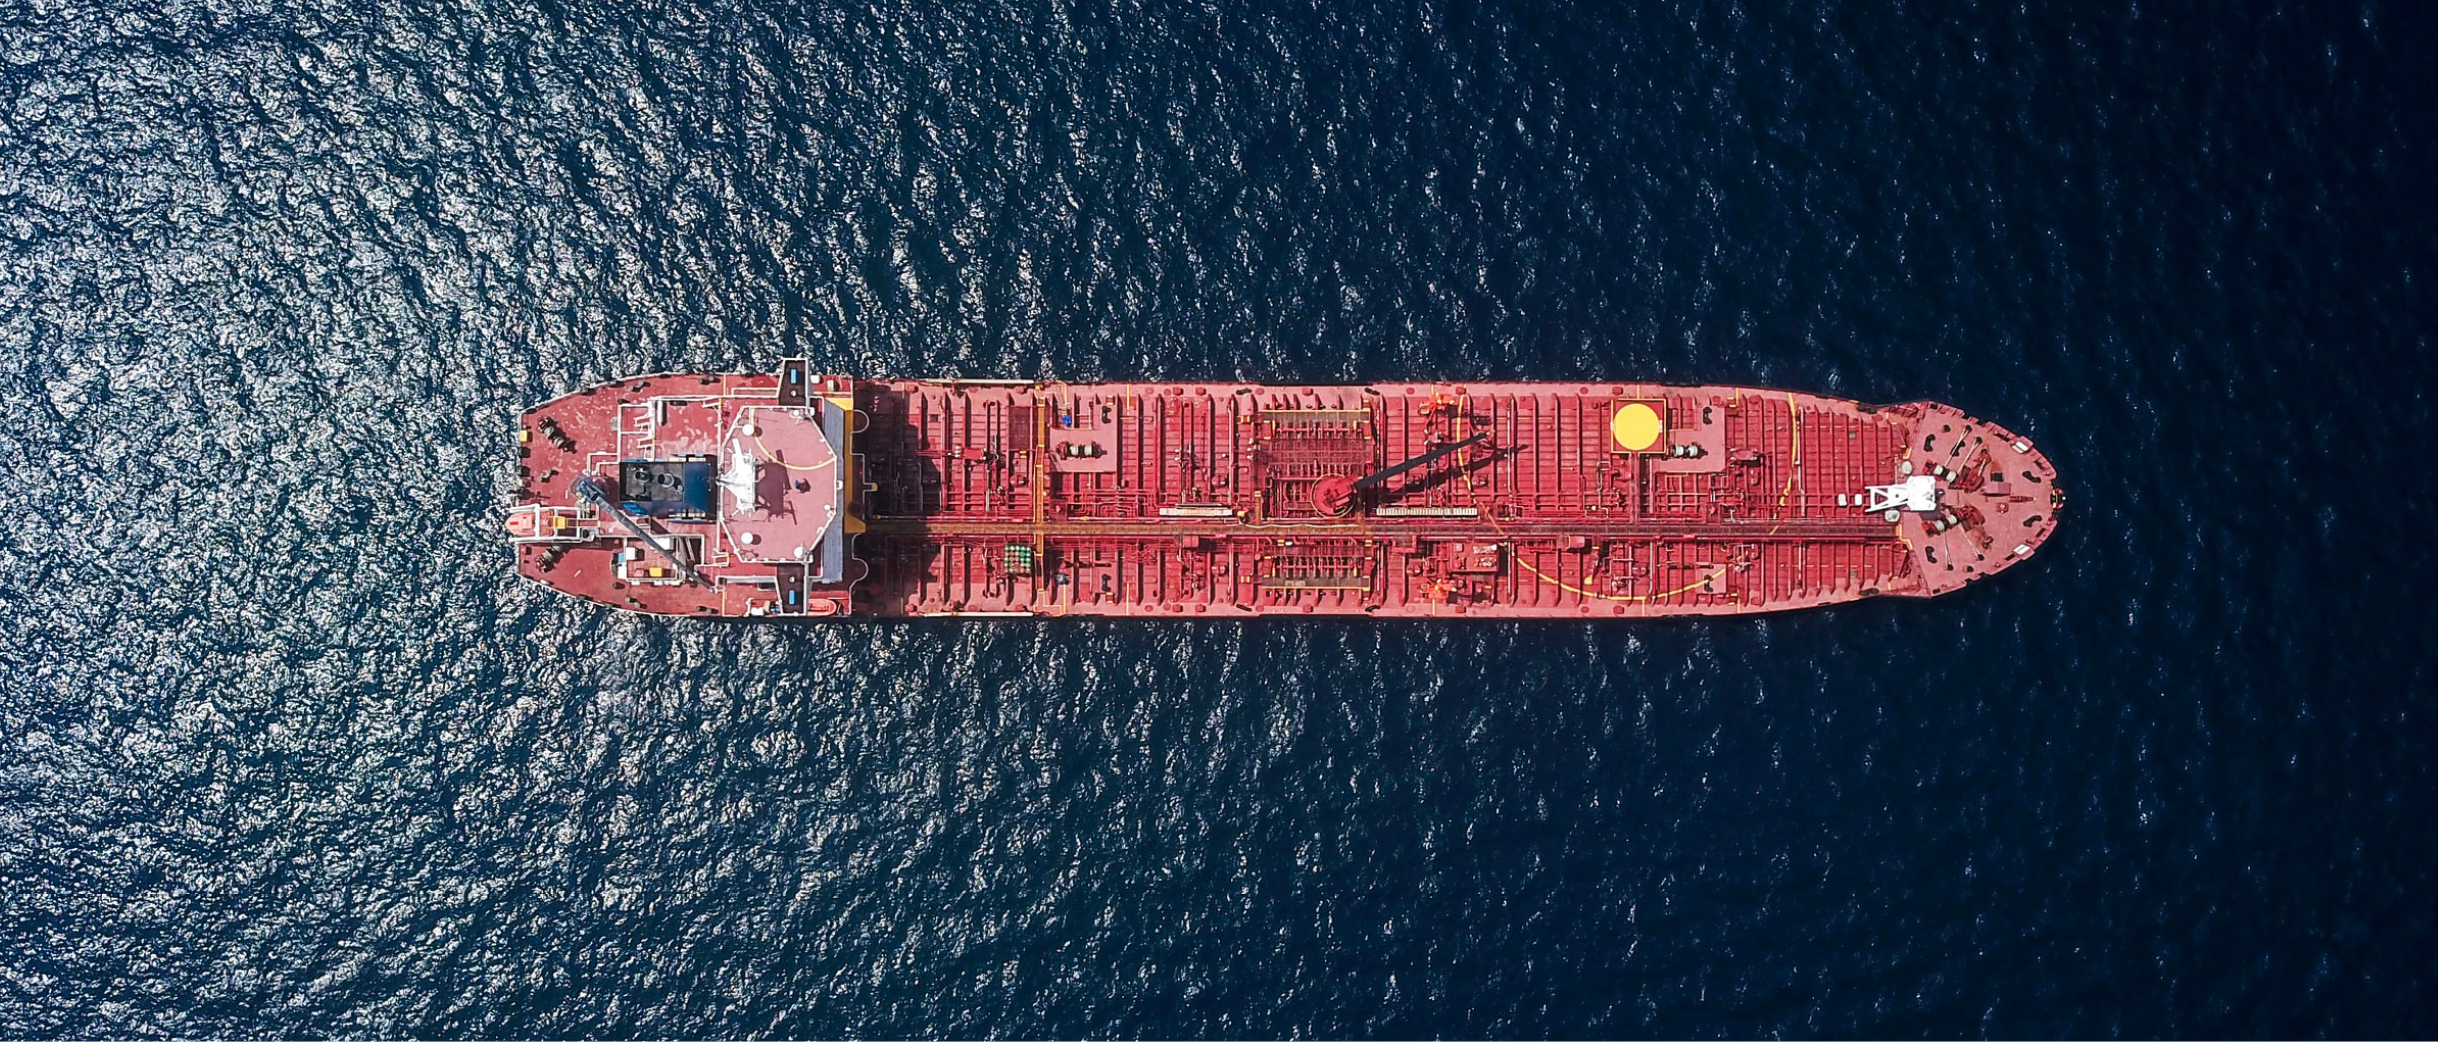 Aerial view of a ship surrounded by water. Photocredit: Shaah Shahidh